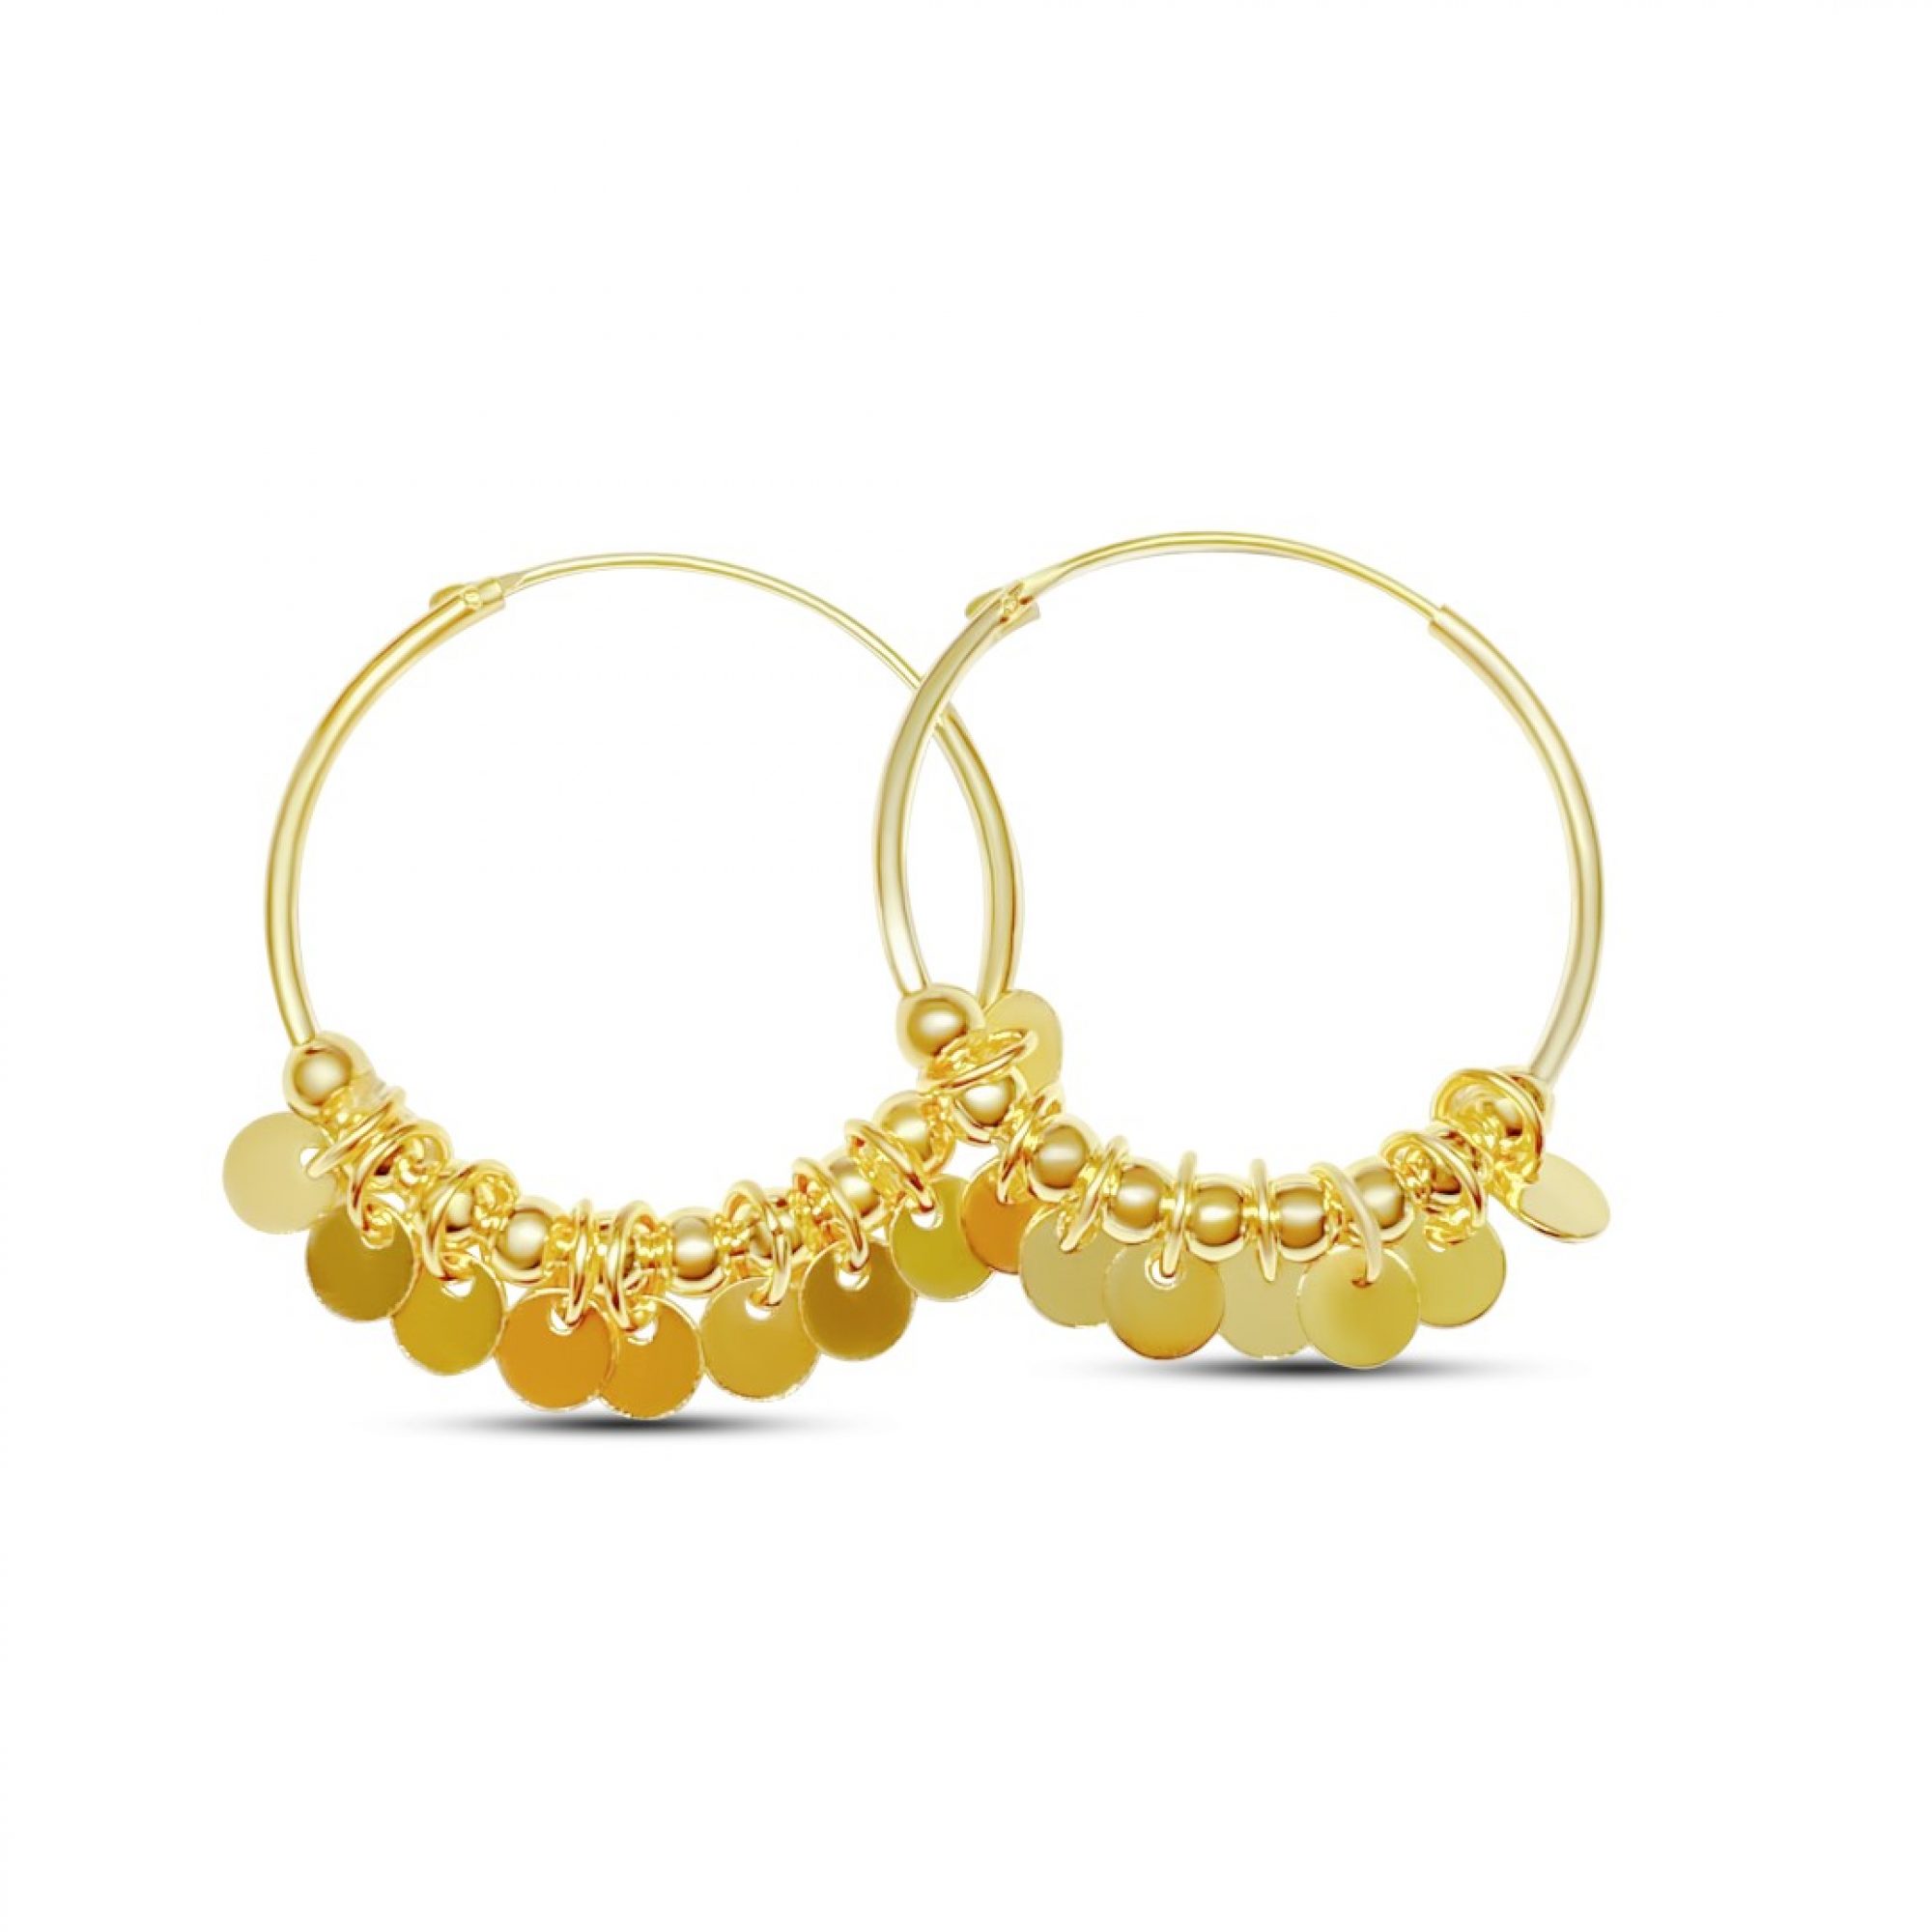 Gold plated hoops with dangles